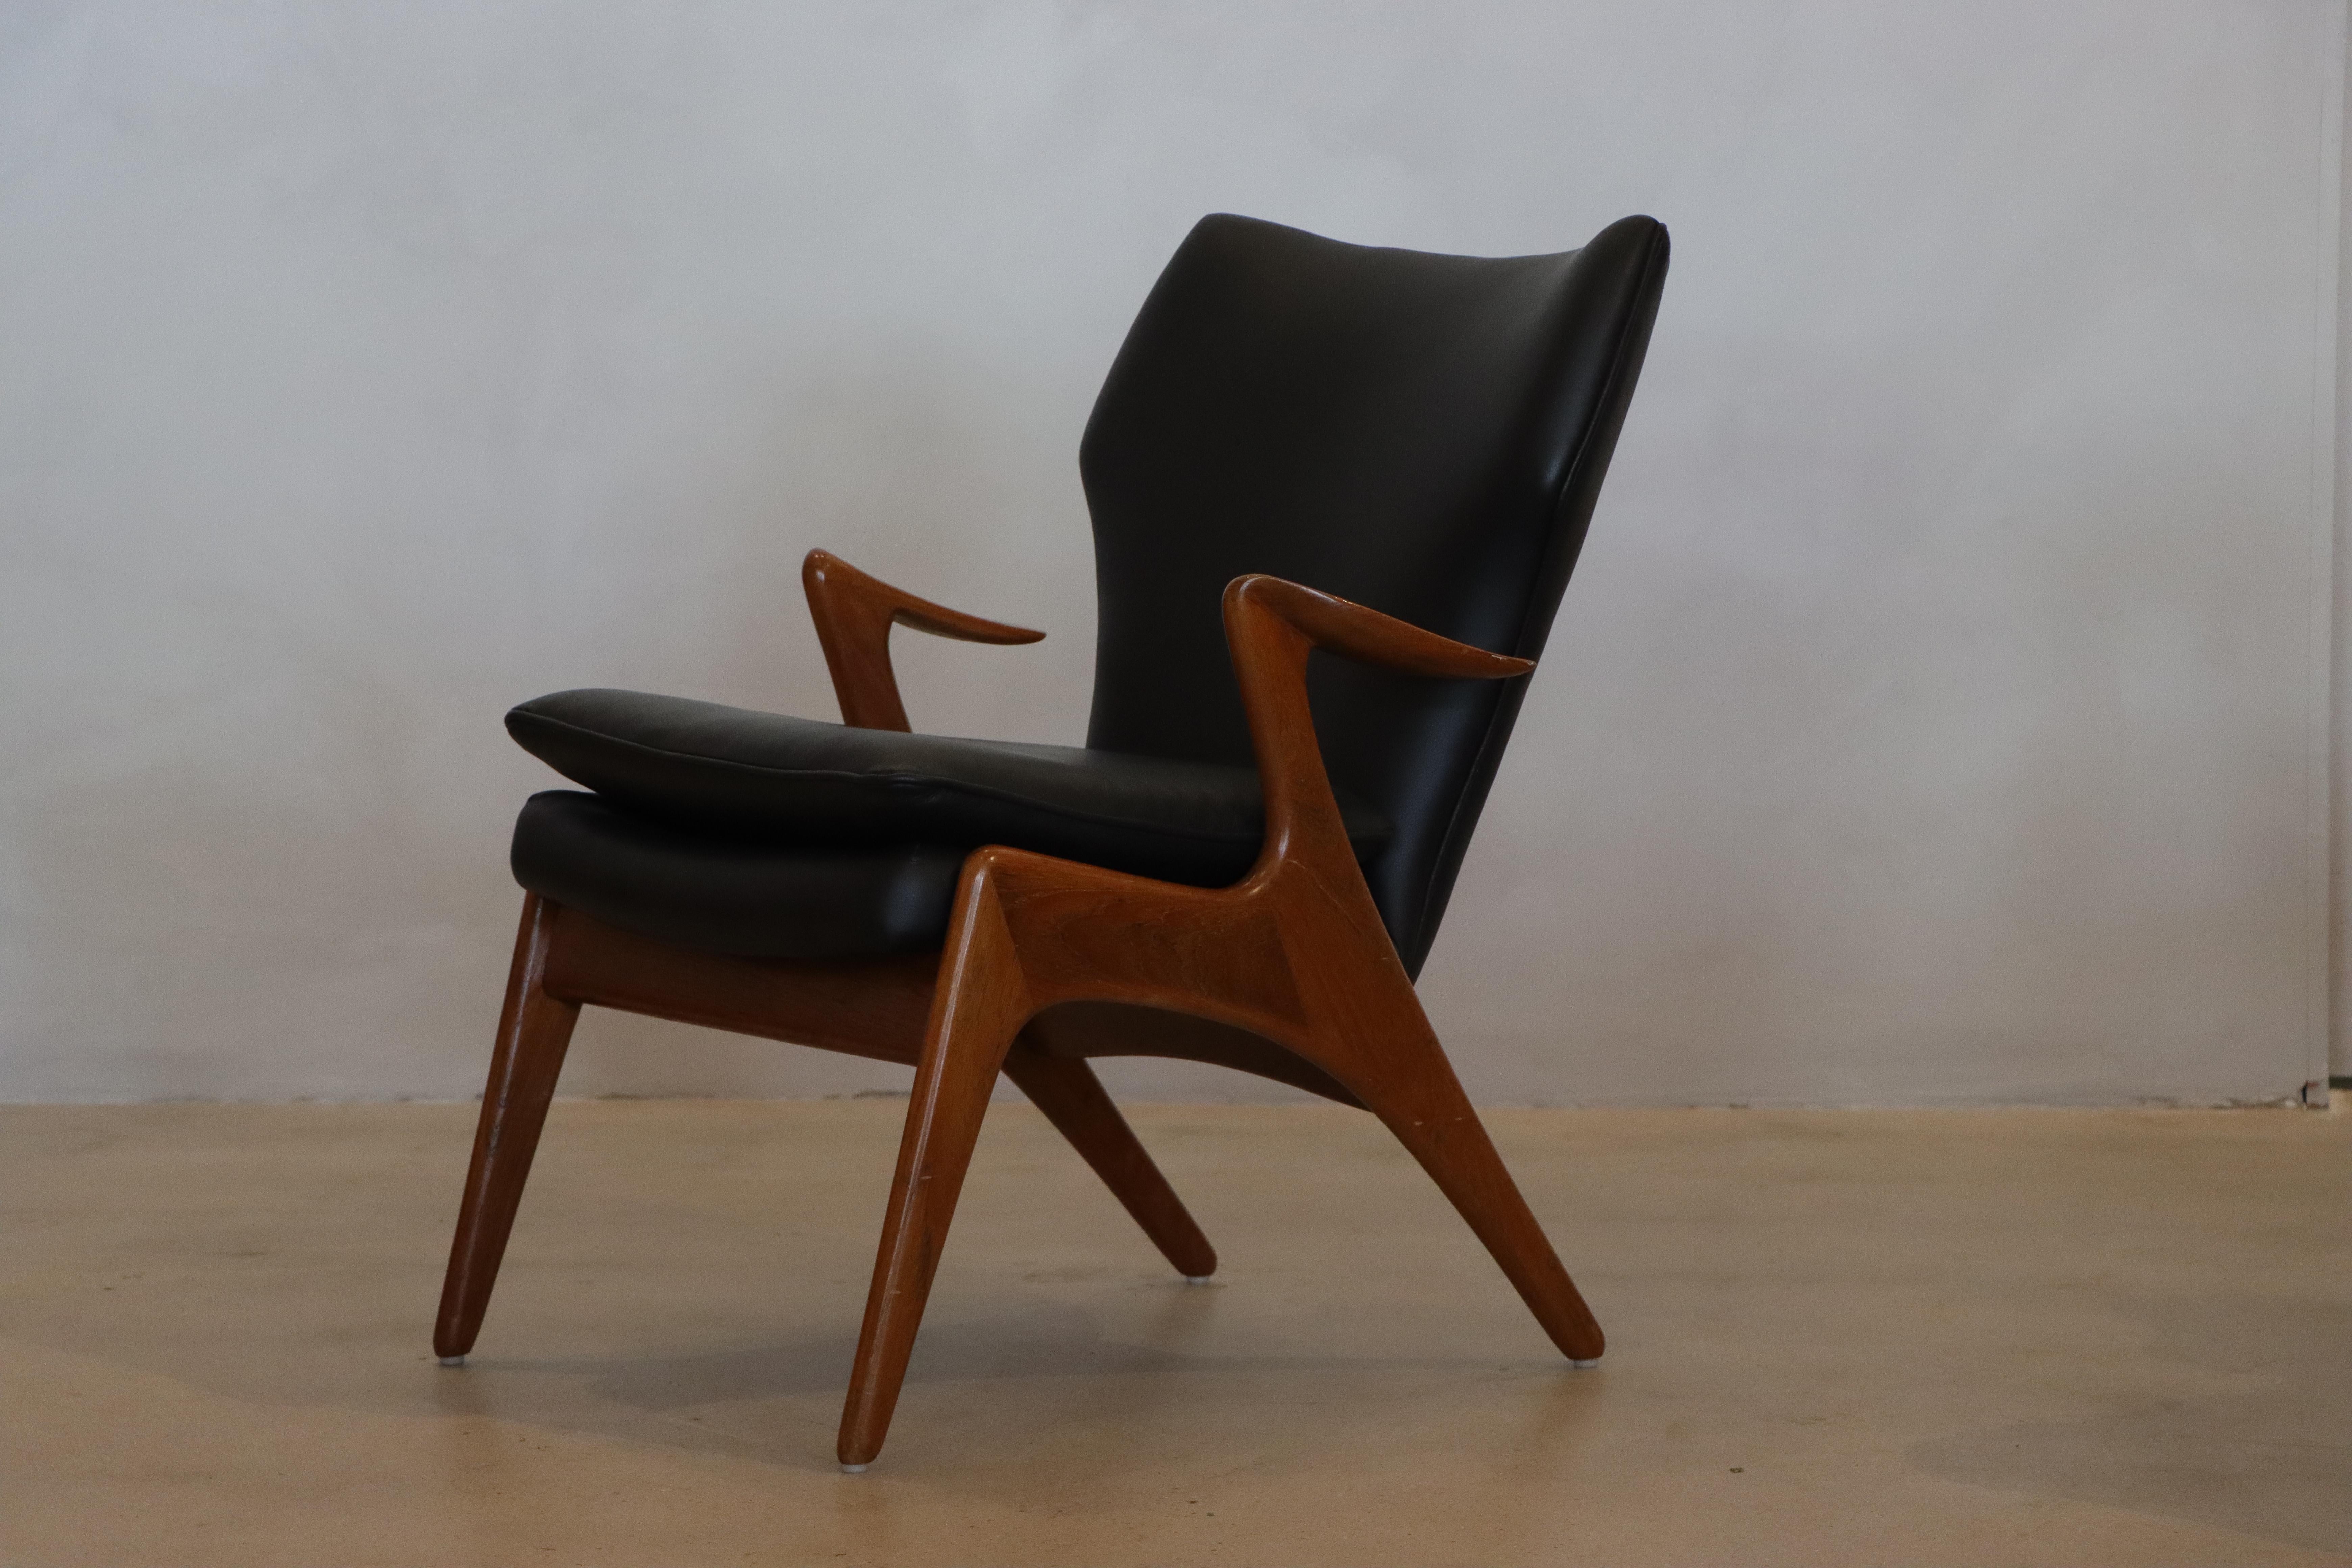 An exceptional Danish sculptural teak lounge chair by Kurt Ostervig, circa 1960s. Solid teak construction with angled back legs, winged backrest and sculpted leaf shaped floating armrests. 

Comfortable and supportive. Chair has been restored in